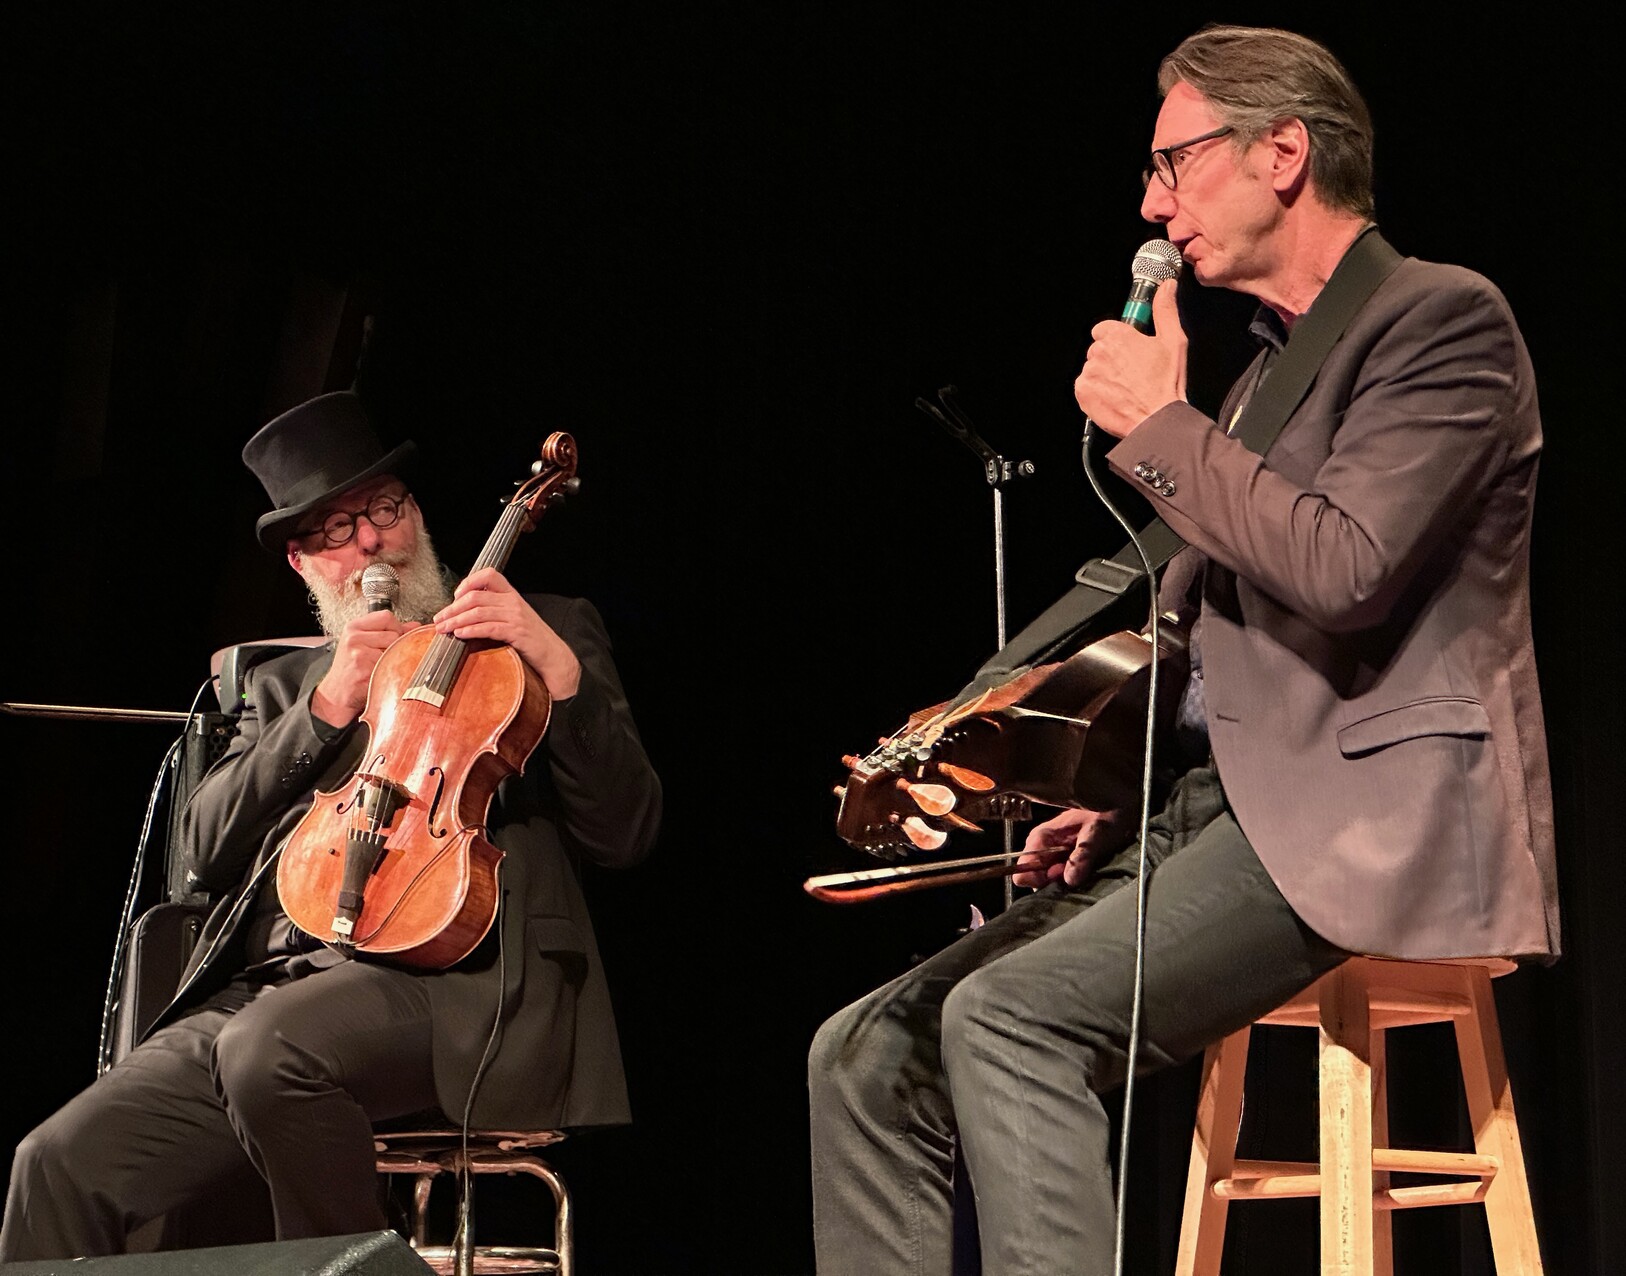 Mikael Marin in a top hat holding a baby cello while Olov Johansson holds his nyckelharpa in one hand and a microphone in the other - both are sitting on stools on stage at the Cedar Cultural Center